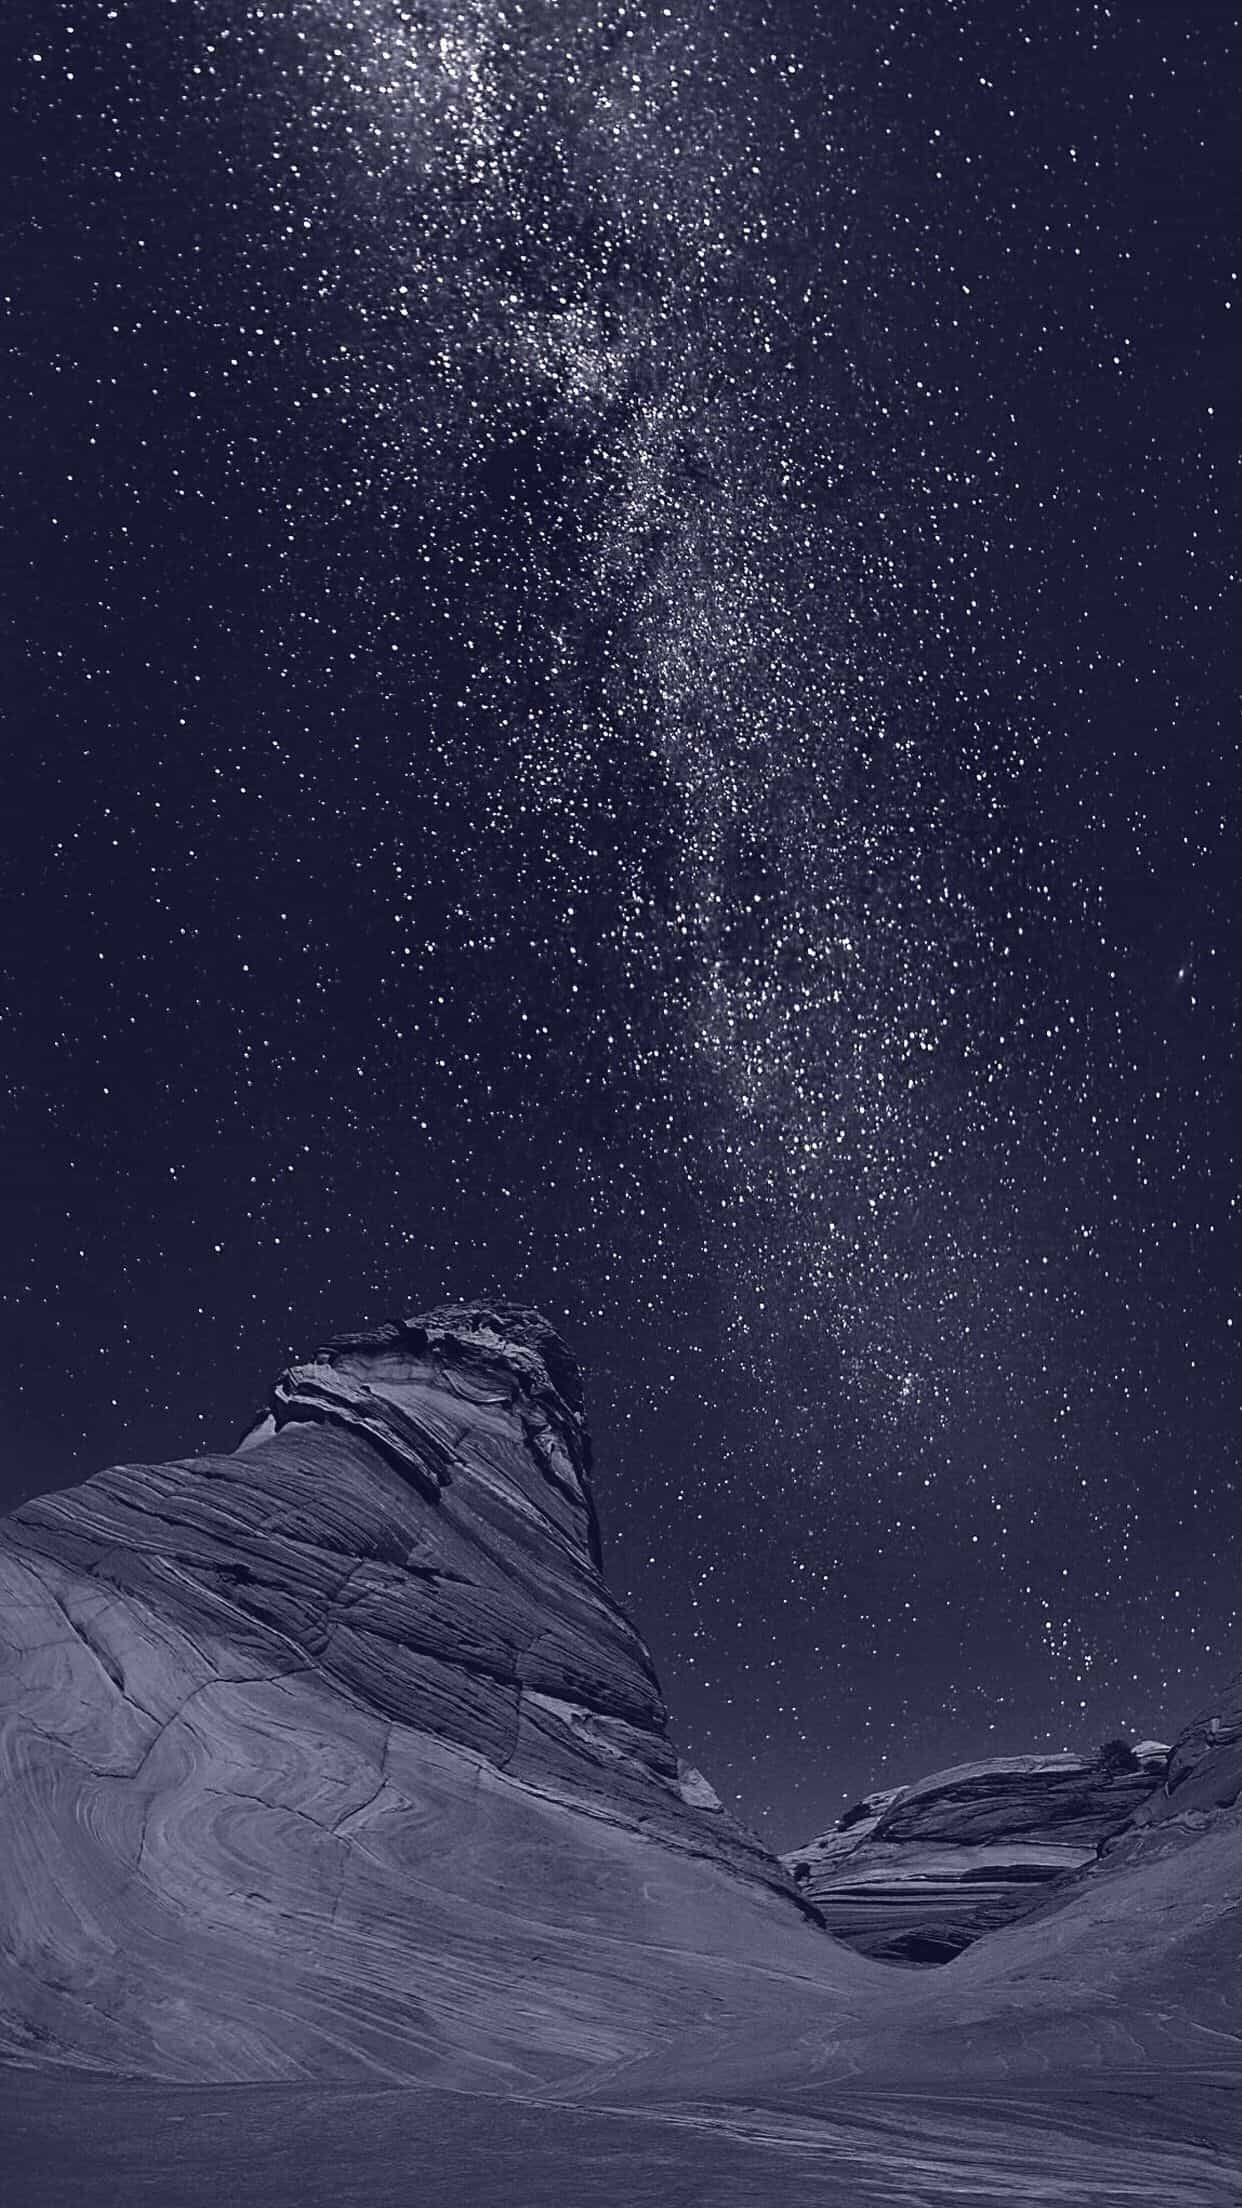 HD Space iPhone Wallpapers – Best Planet Backgrounds for iPhone. Looking for some high-quality HD Space iPhone wallpapers? Here are some awesome pics which you can use as planet and starts wallpapers for your phone.  Feel free to save them on Pinterest to your Wallpapers boards, or download them all! #wallpaper #background #space #photography #night #sky #planets #iphone #galaxy #samsung